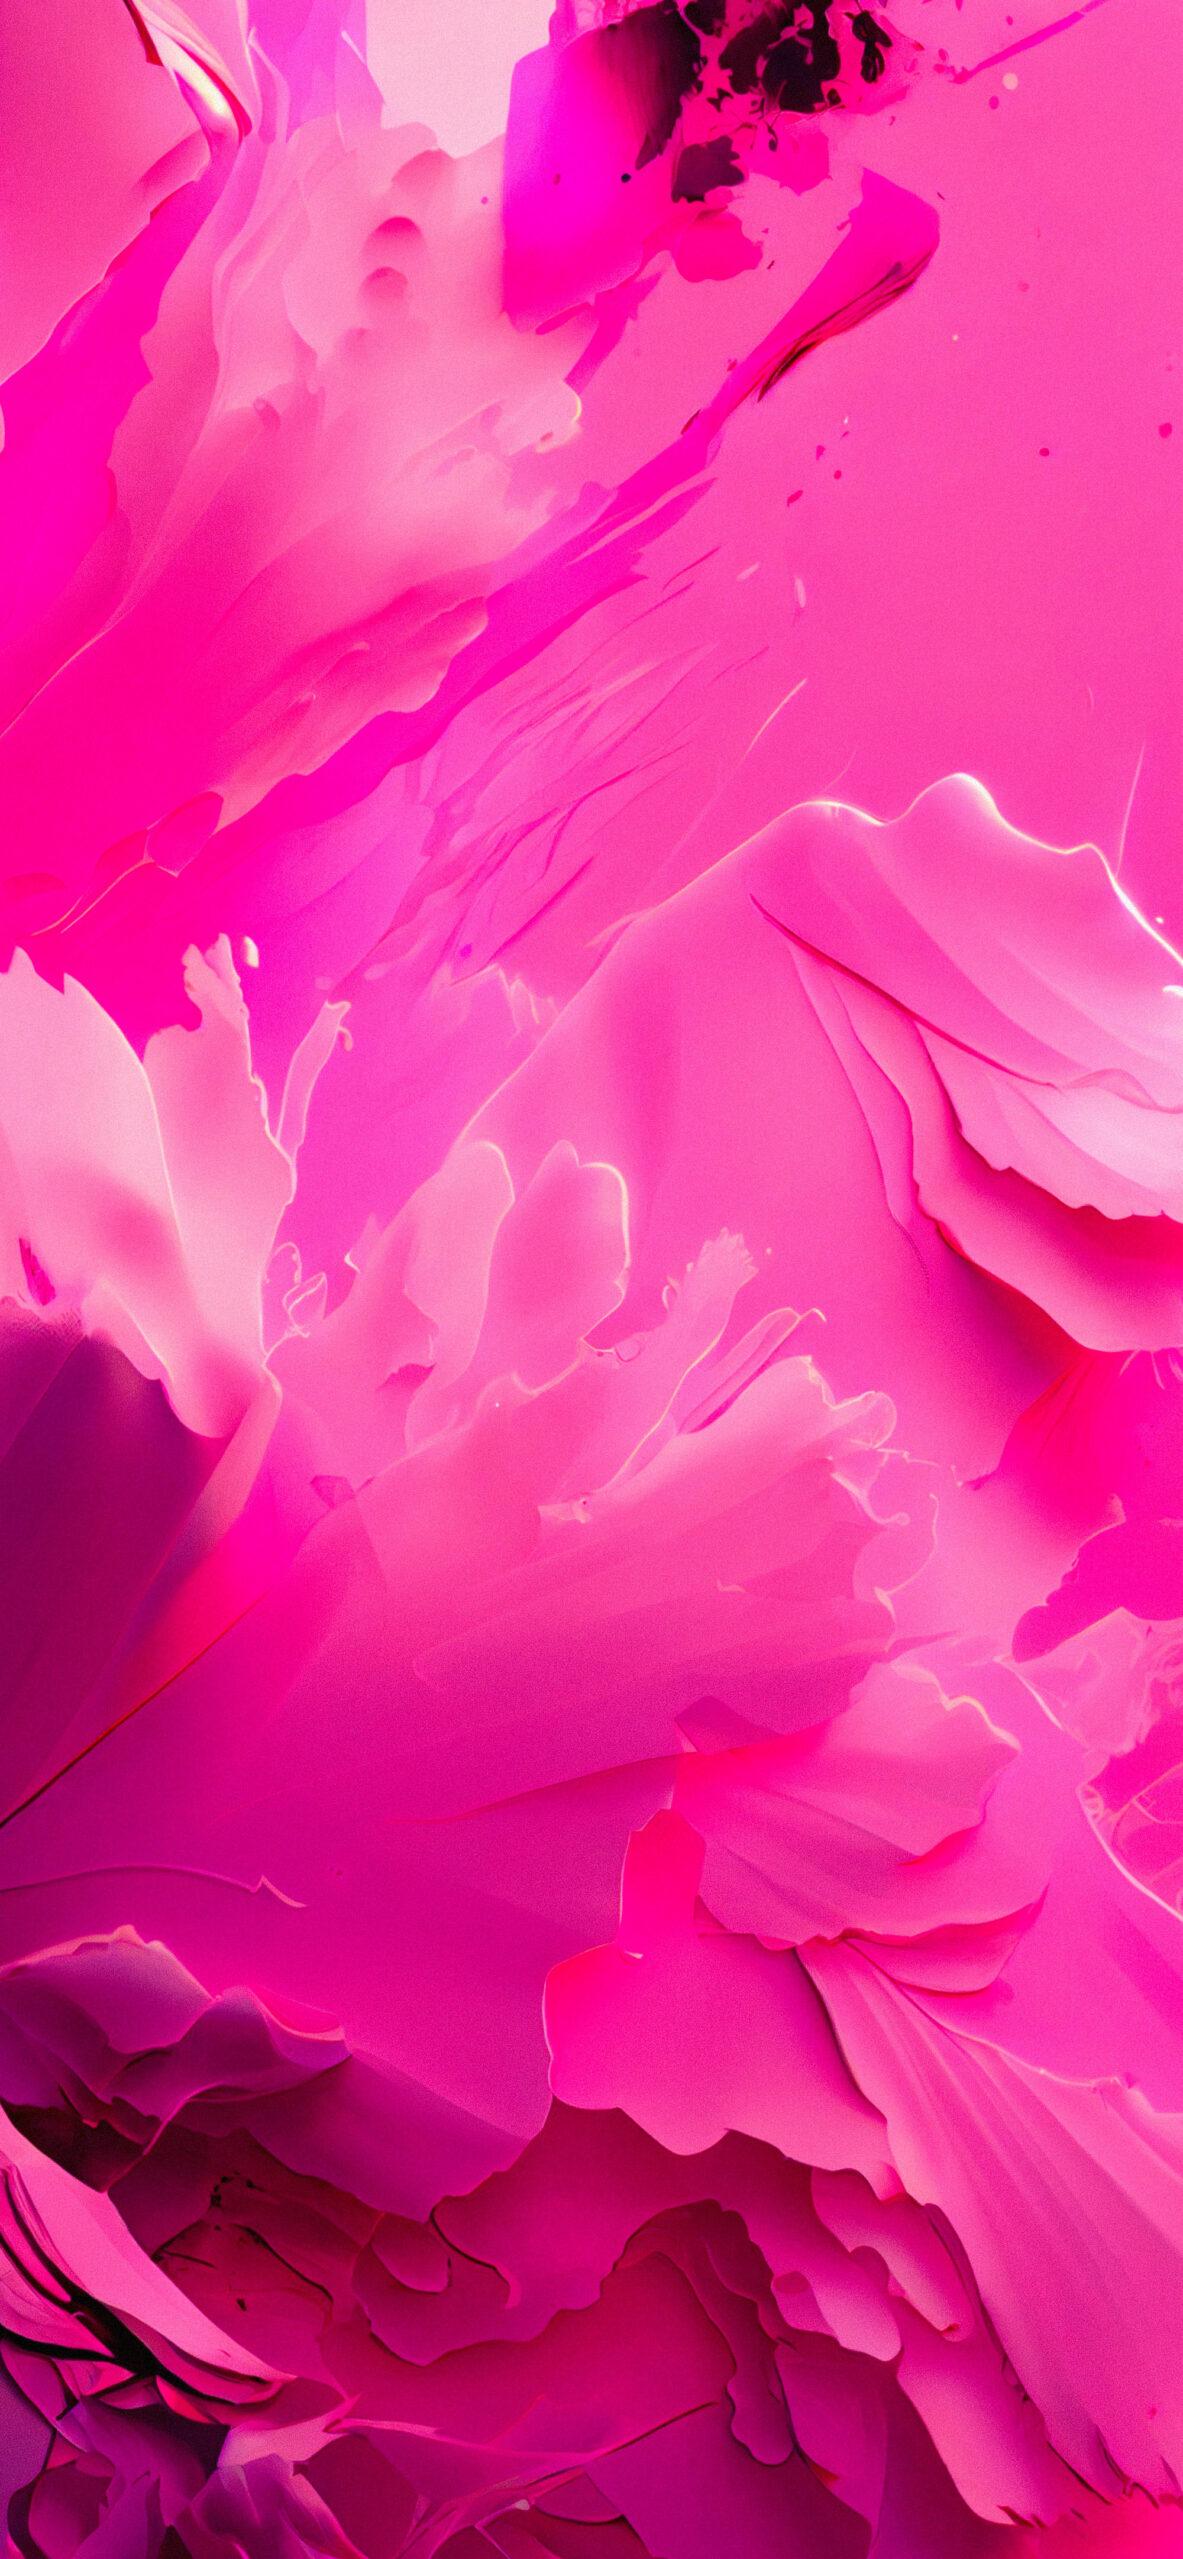 Abstract Hot Pink Wallpaper Phone Girly Aesthetic